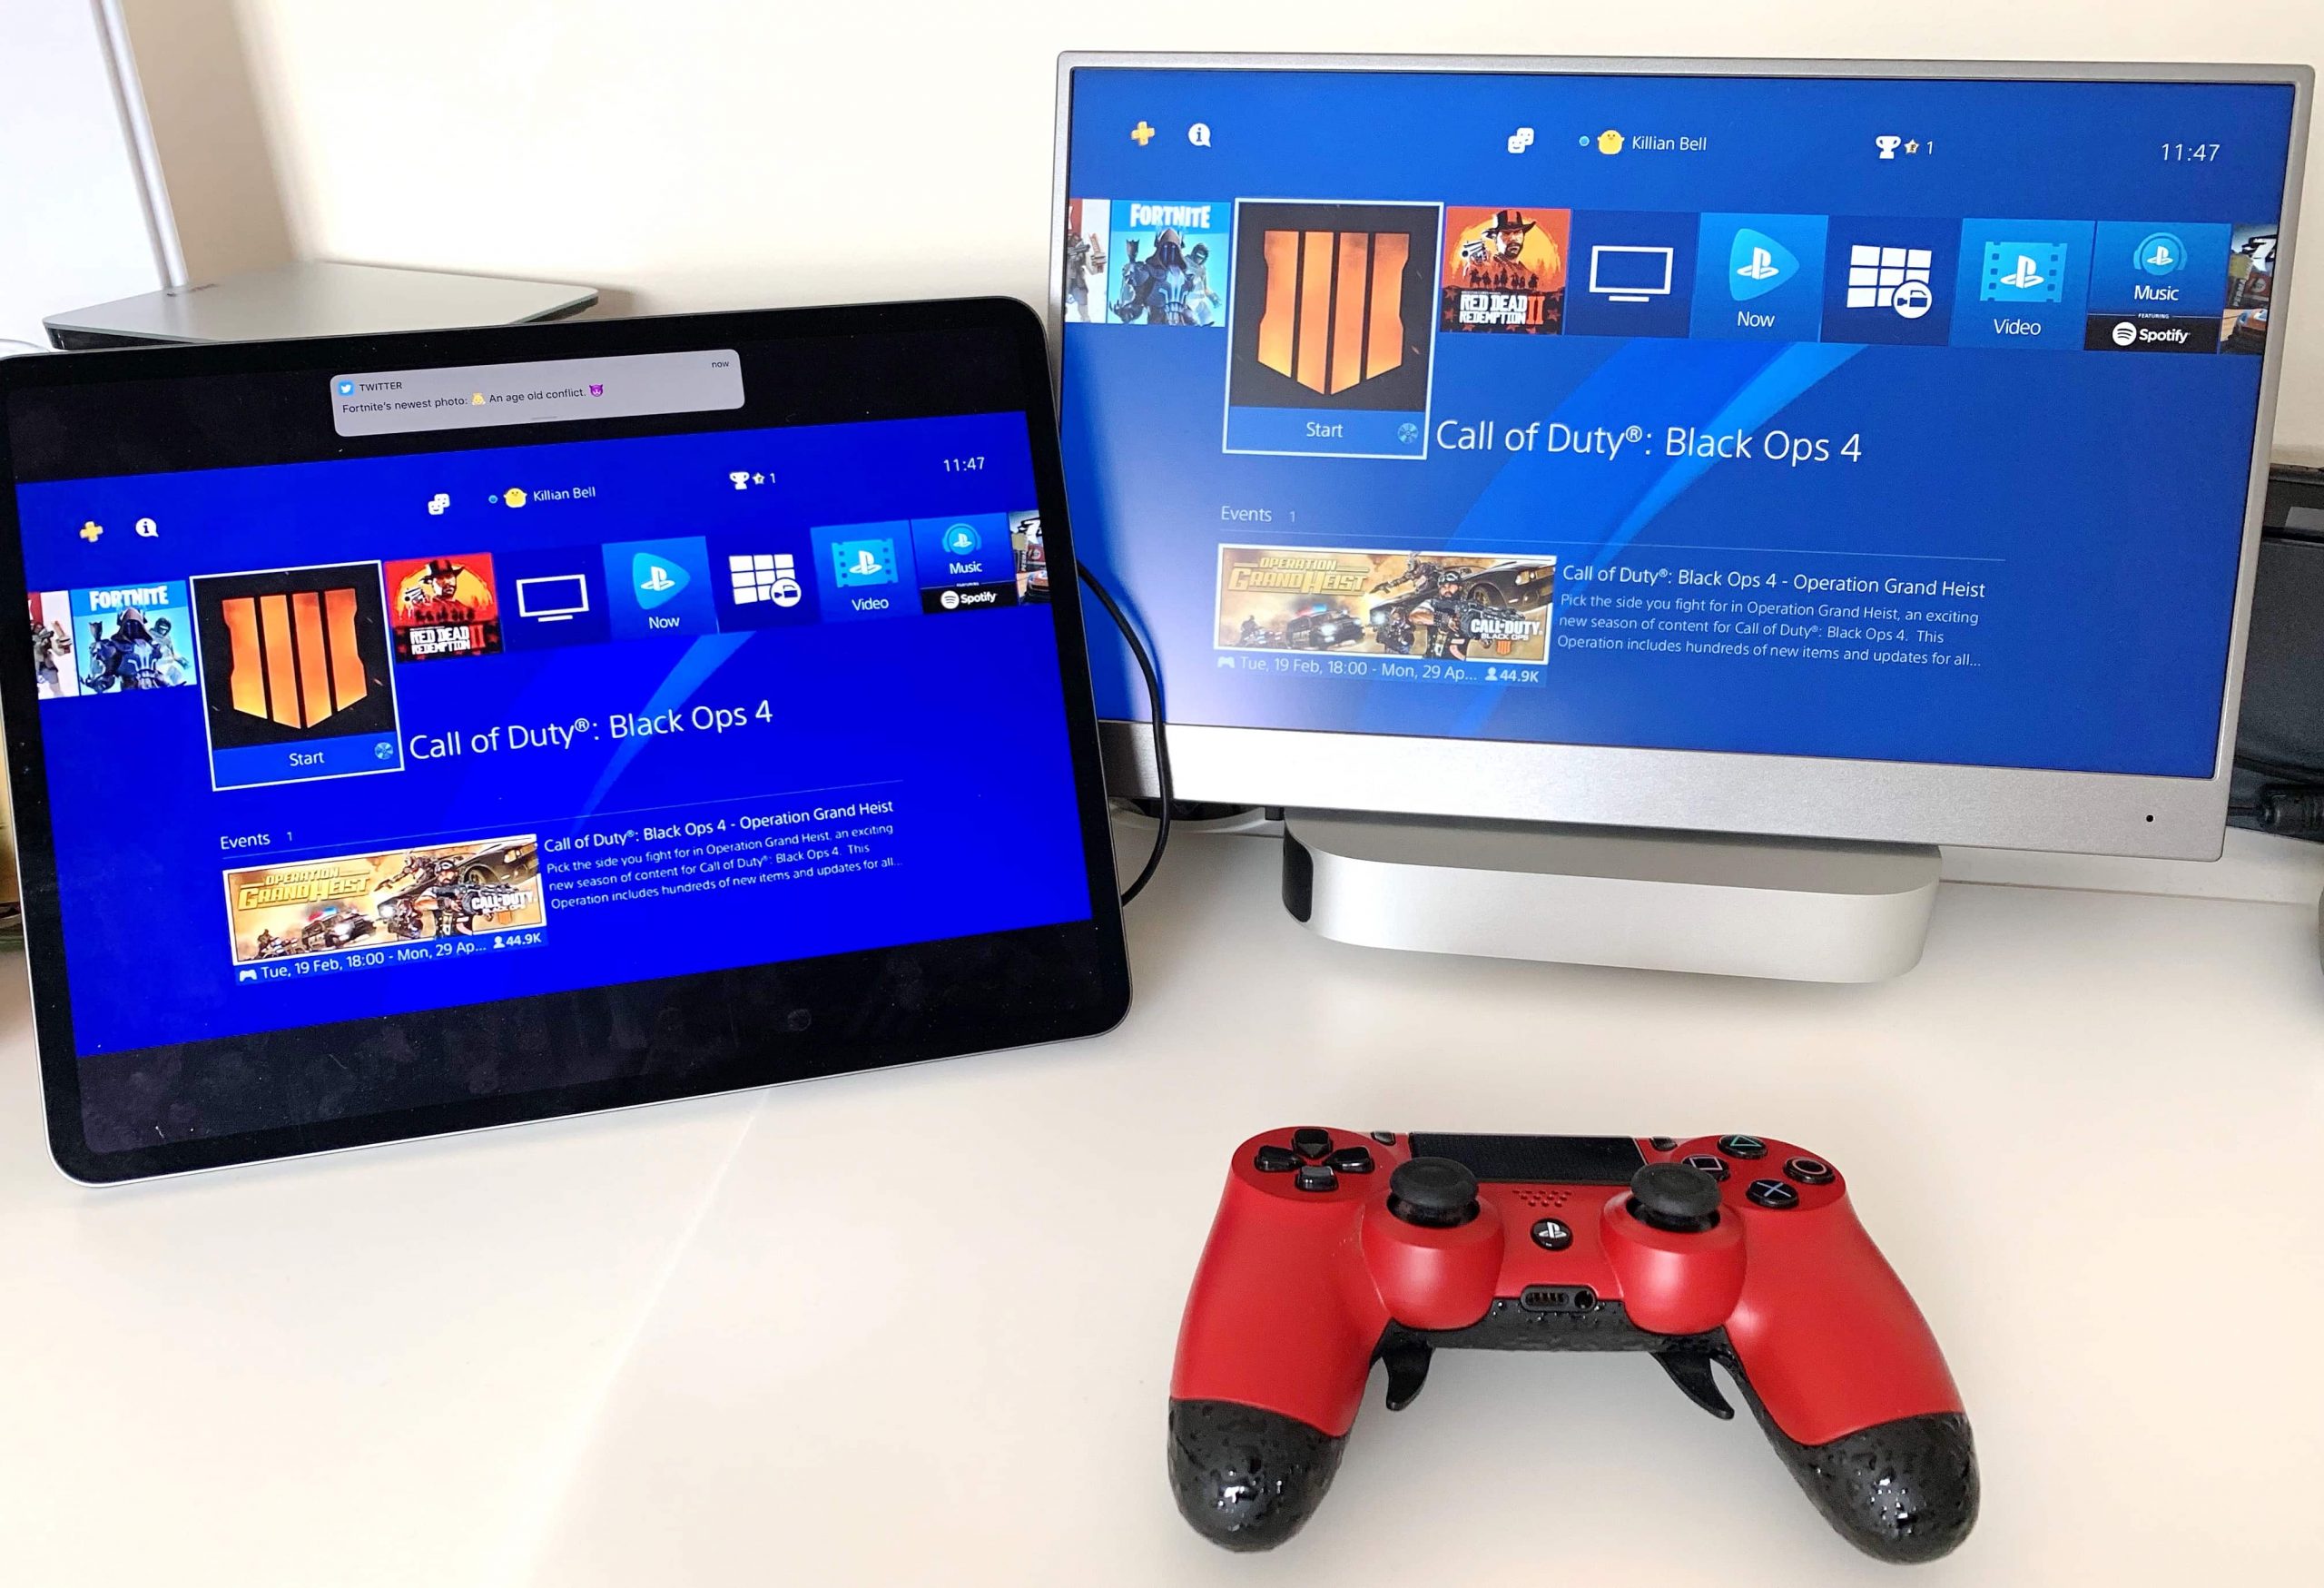 How to Use DualShock controller with PS4 Remote Play?